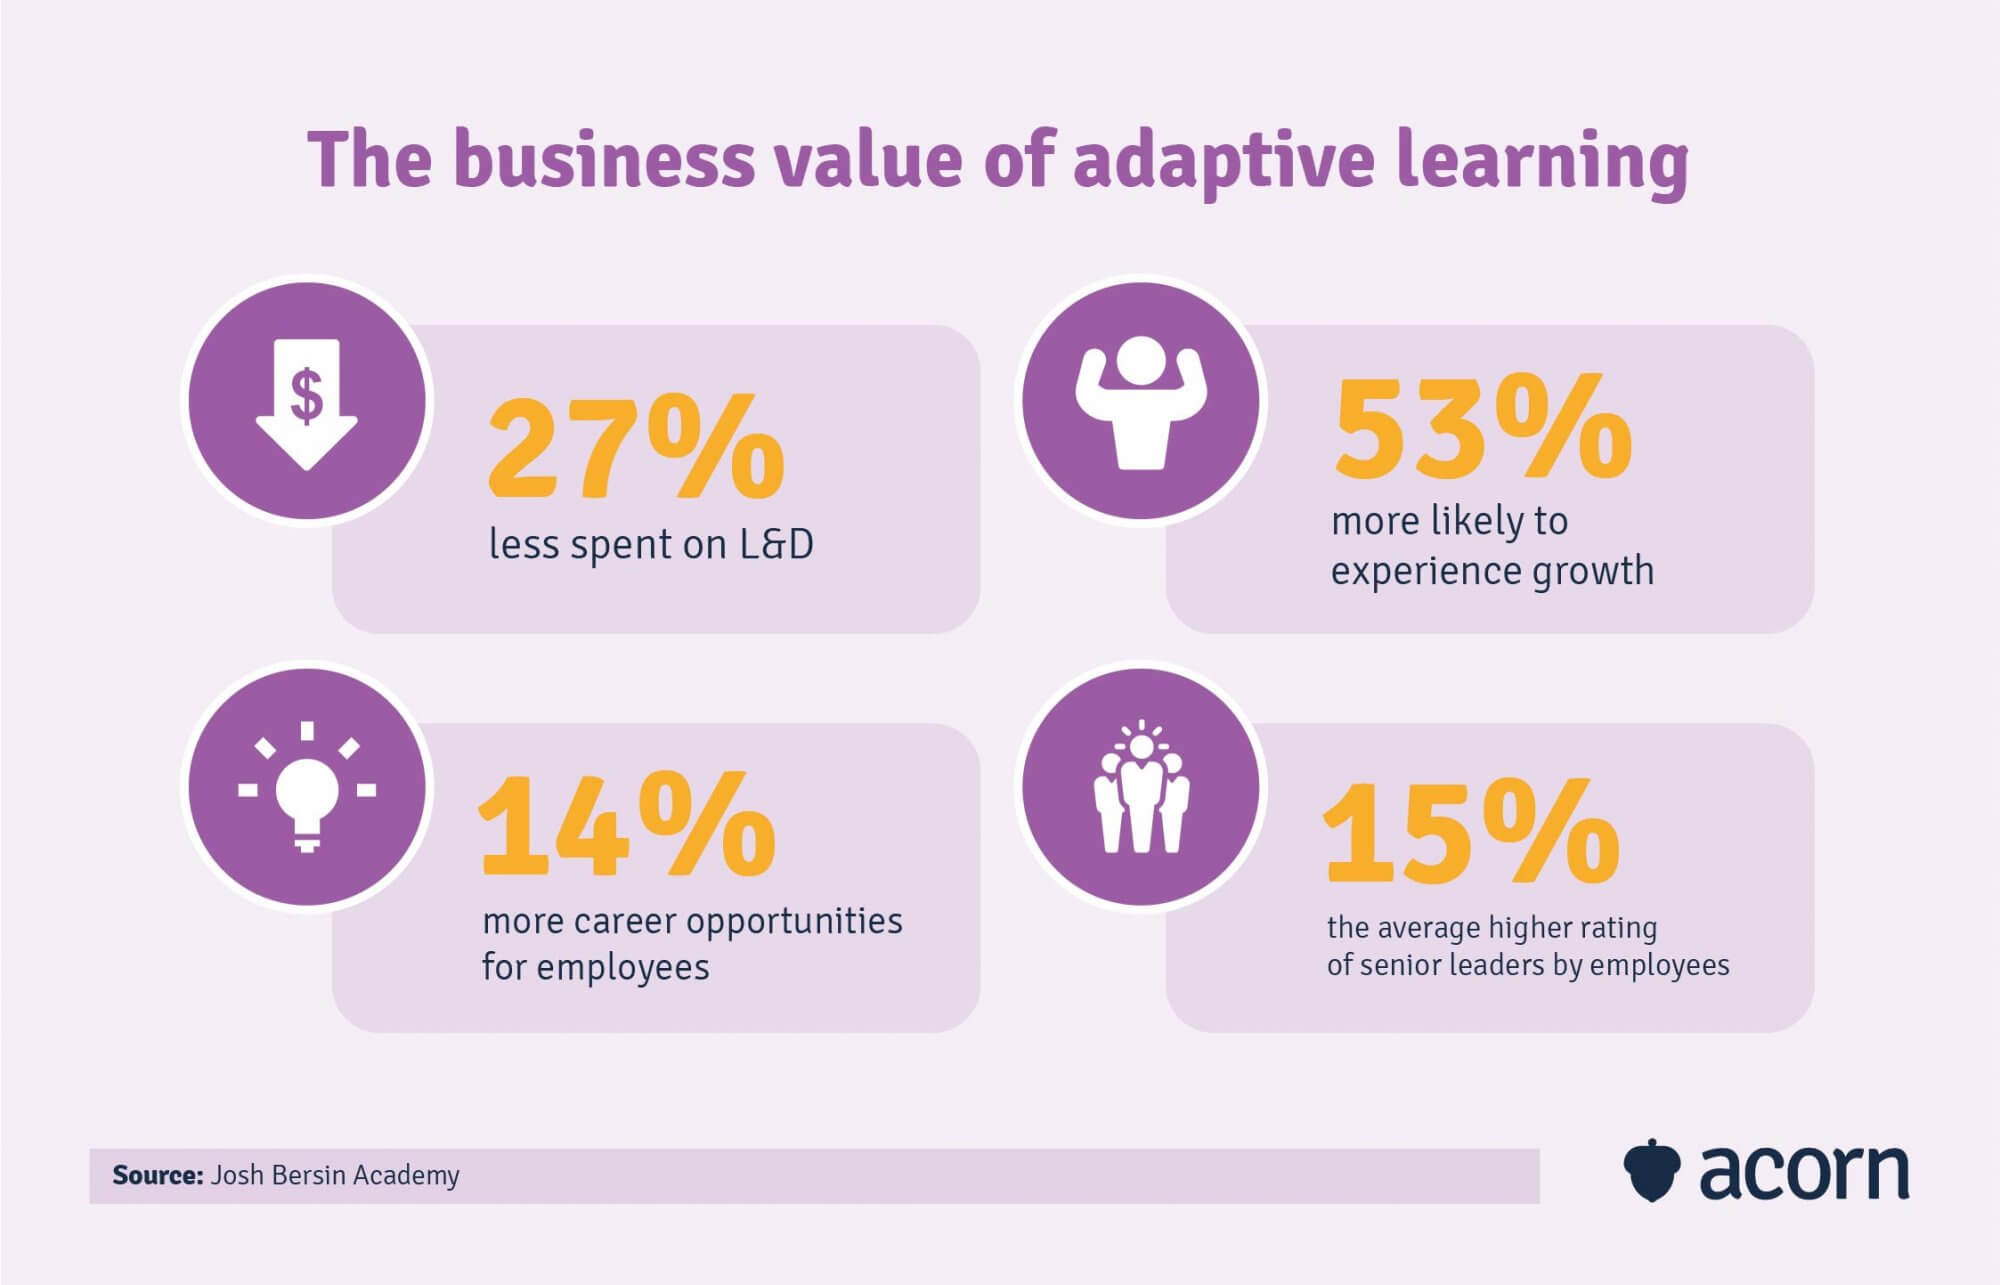 infographic showing the business value of adaptive learning through statistics